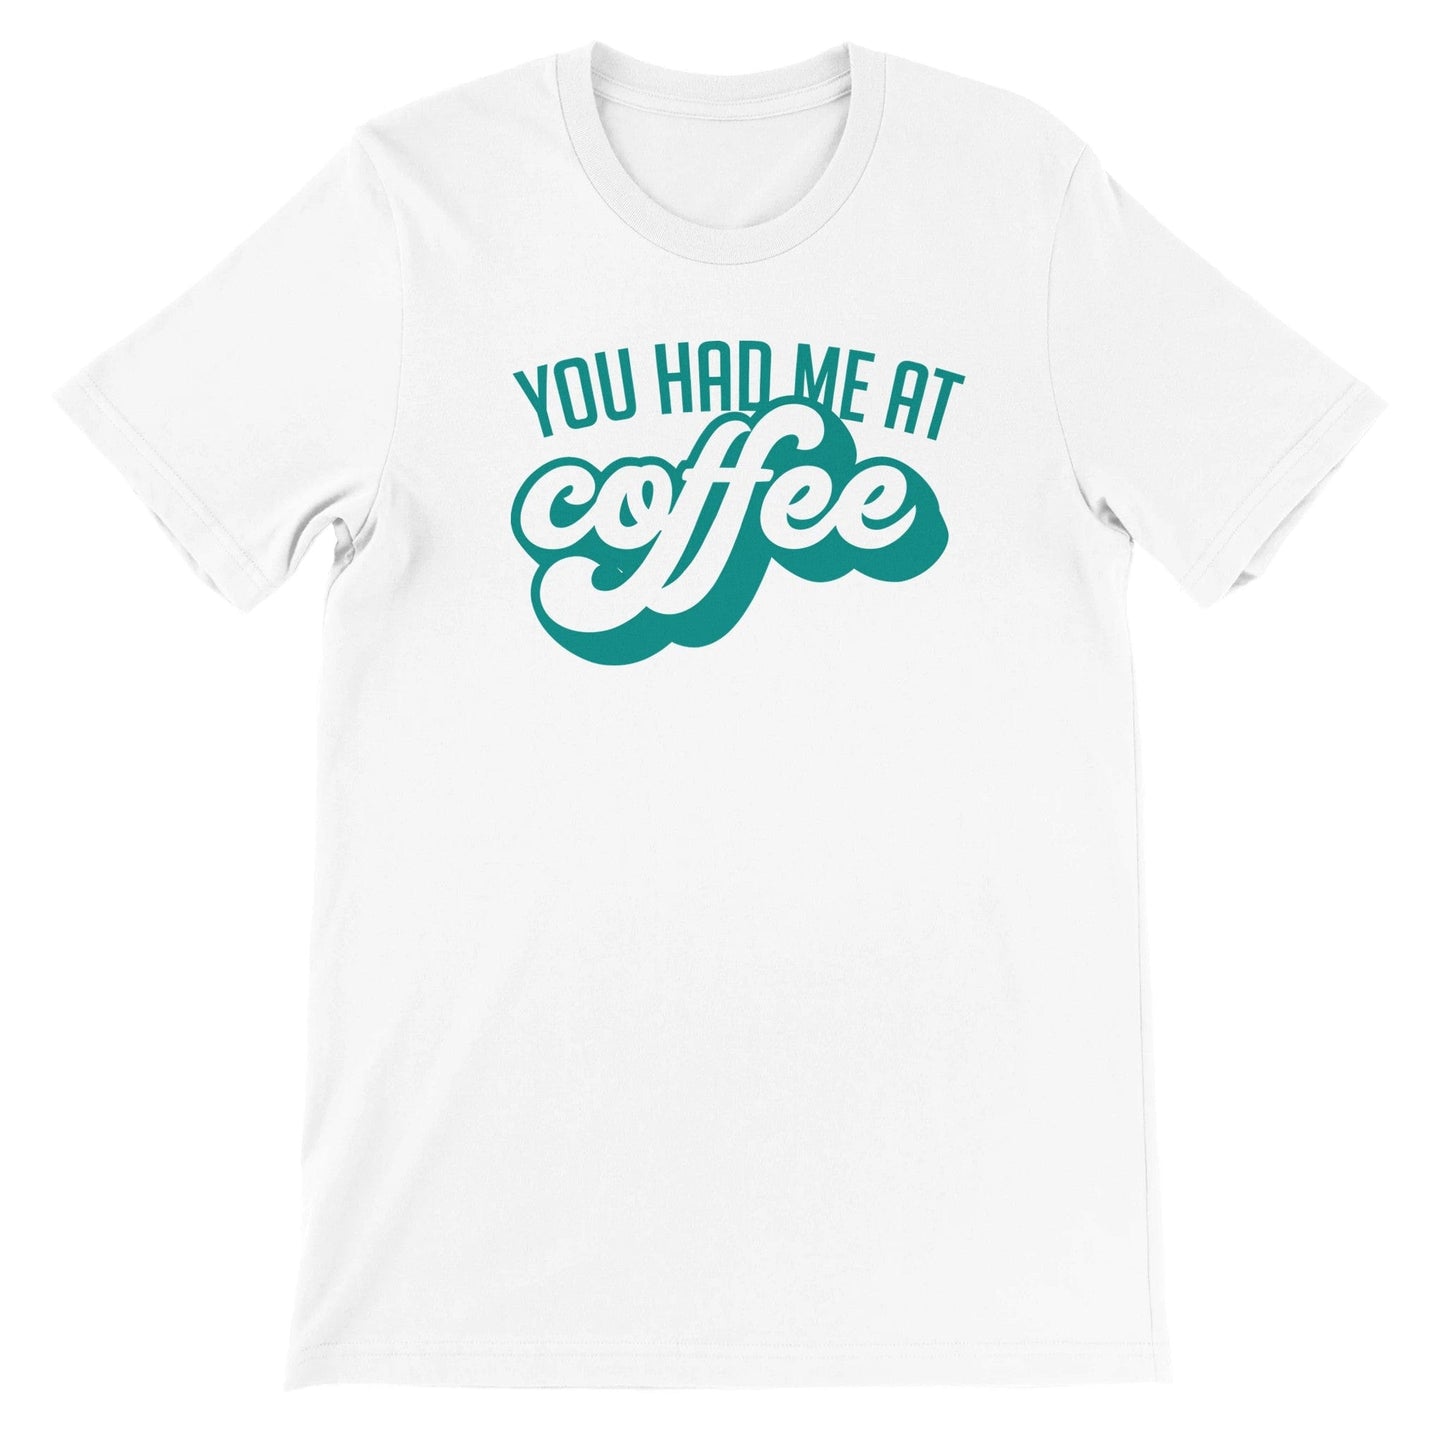 Good Bean Gifts "You Had Me at Coffee" - Unisex Crewneck T-shirt White / S